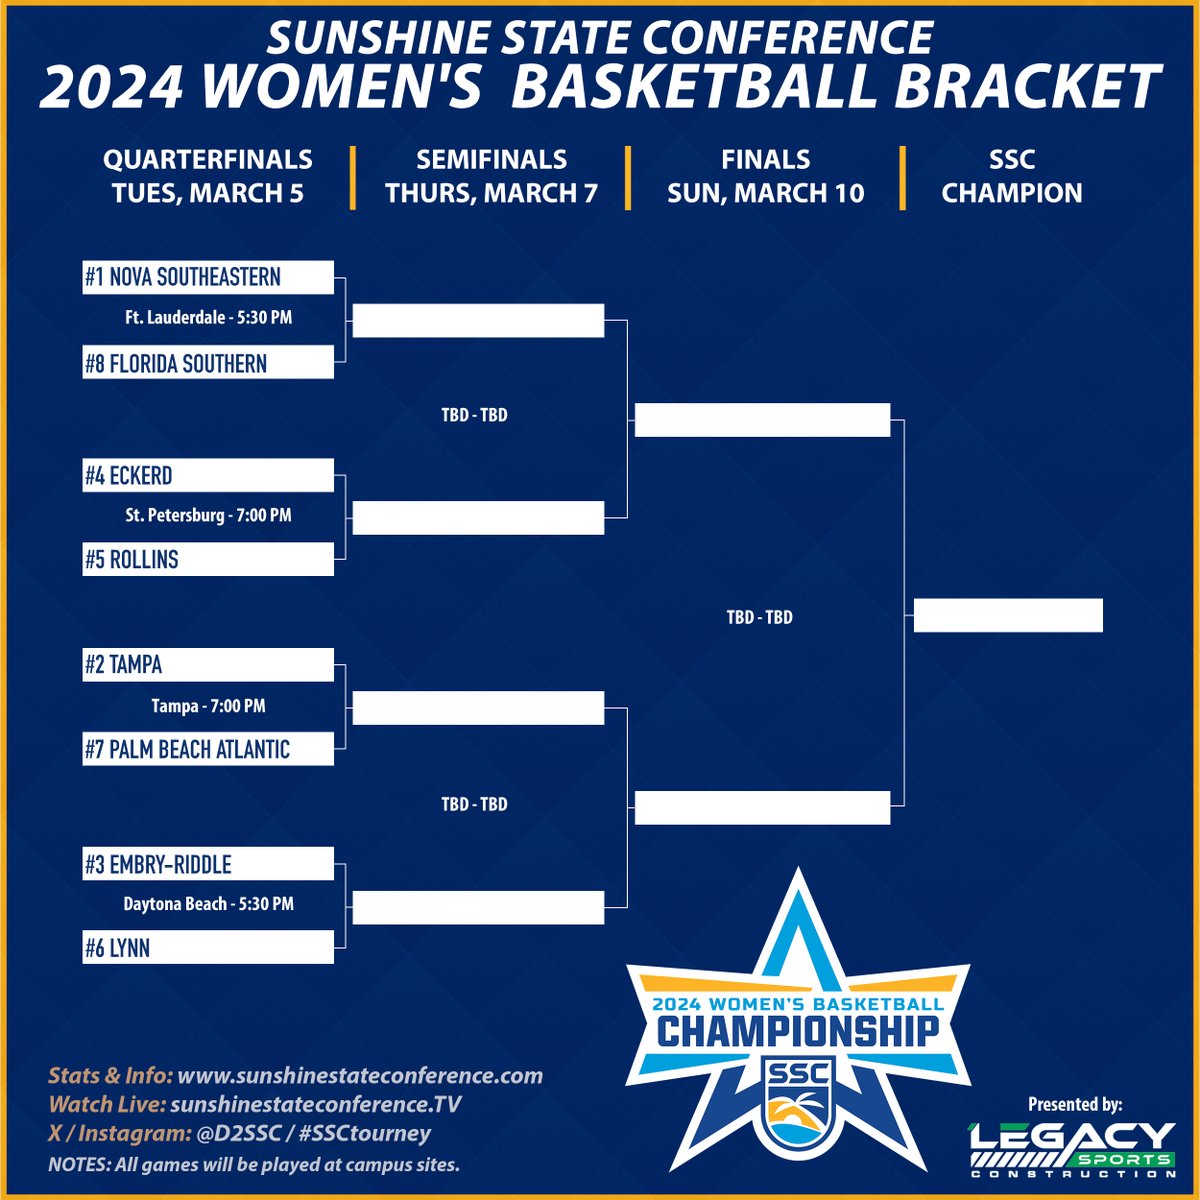 Presenting the 2024 Sunshine State Conference Women's Basketball Tournament bracket! More info: bit.ly/SSC__WBB 🌴☀️🌊🏀 #SSCtourney